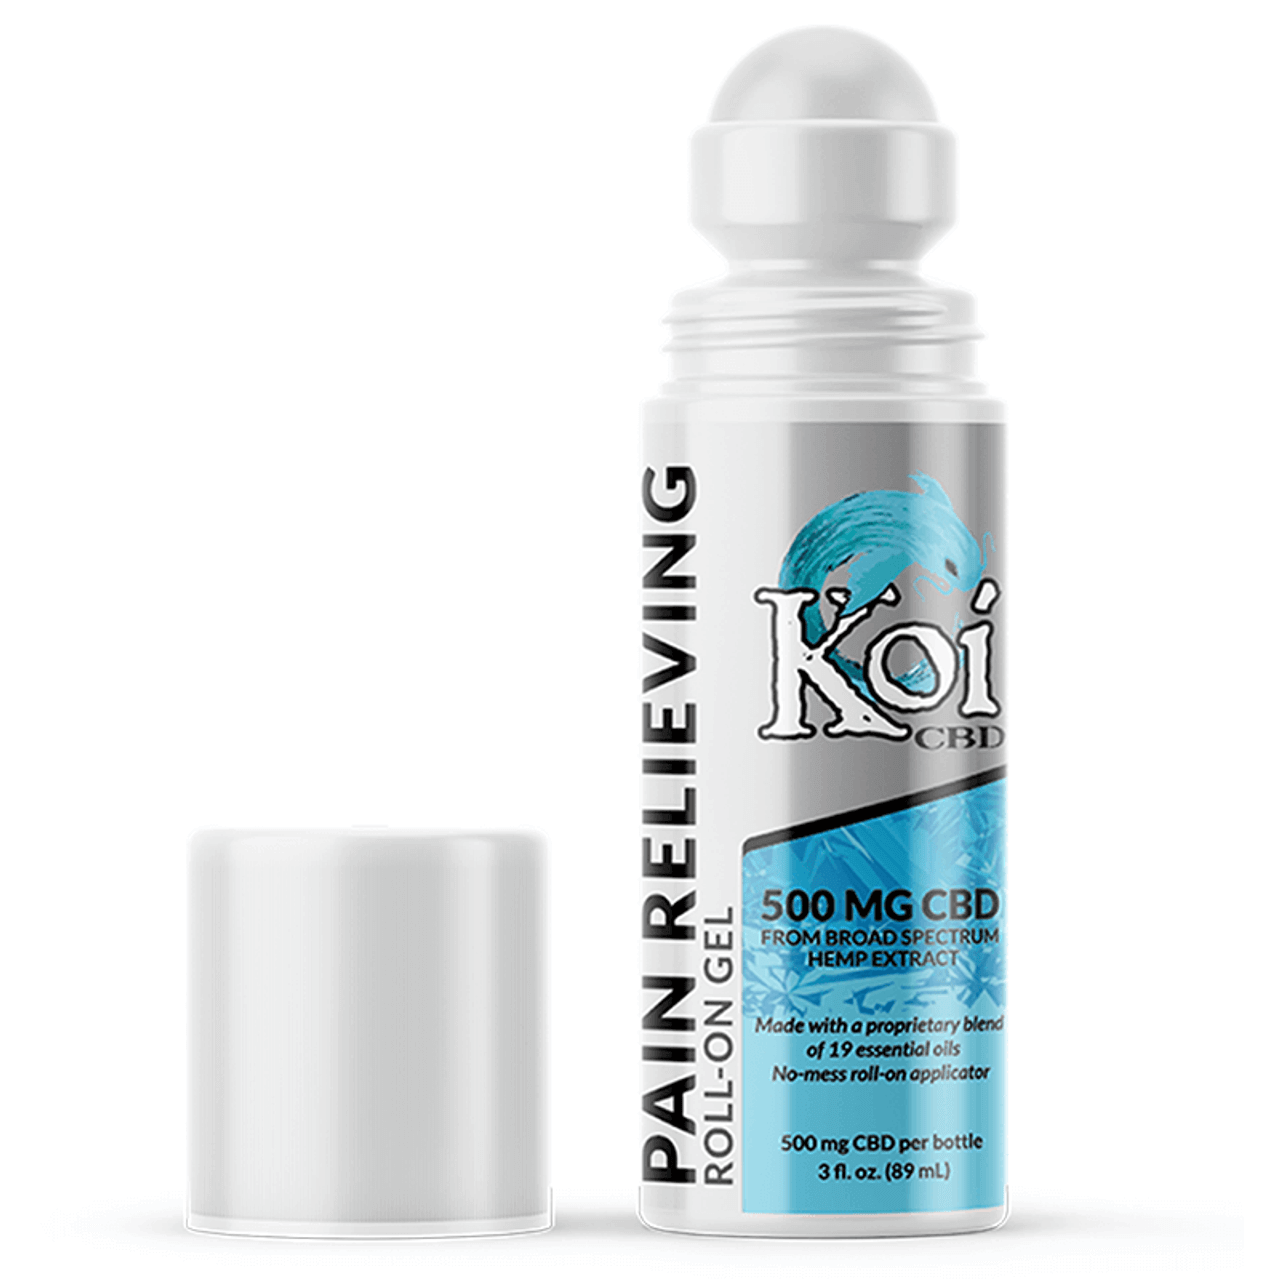 Koi CBD Pain Relieving Roll-On Gel 500mg